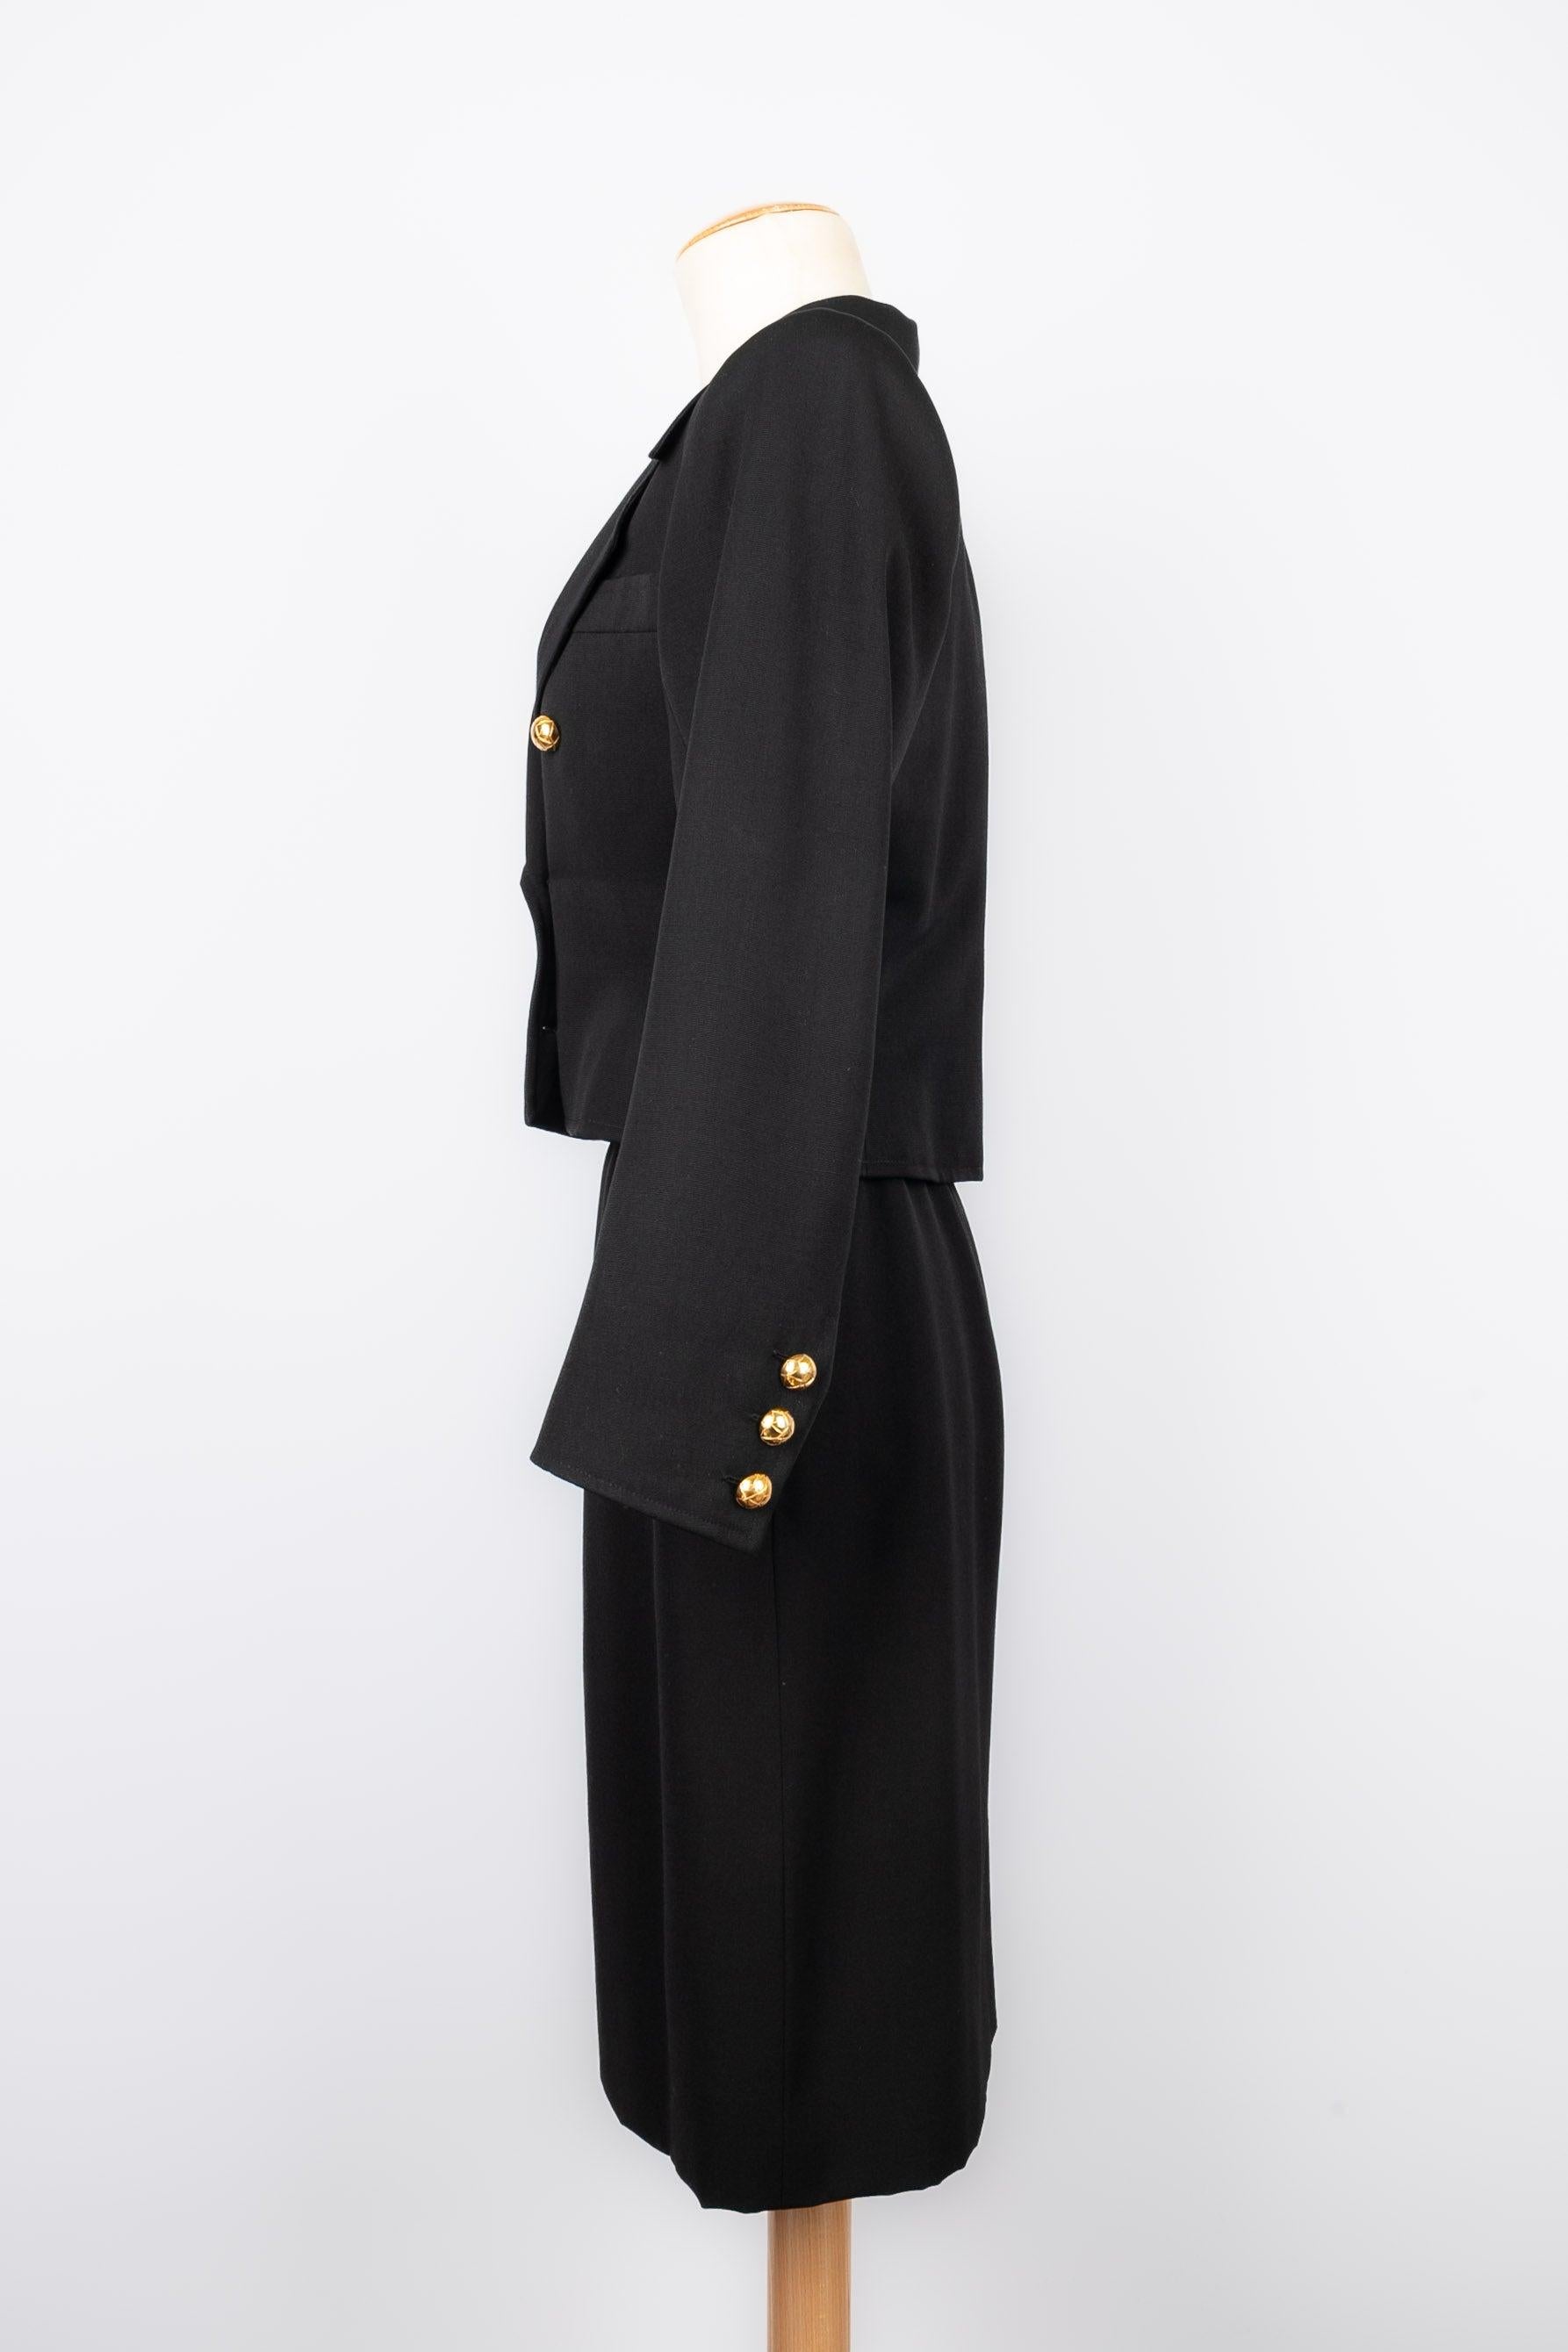 Yves saint Laurent - (Made in France) Black skirt suit enlivened with a satin belt. No size nor composition label, it fits a 36FR. 1983 Spring-Summer Haute Couture Collection.

Additional information:
Condition: Very good condition
Dimensions: